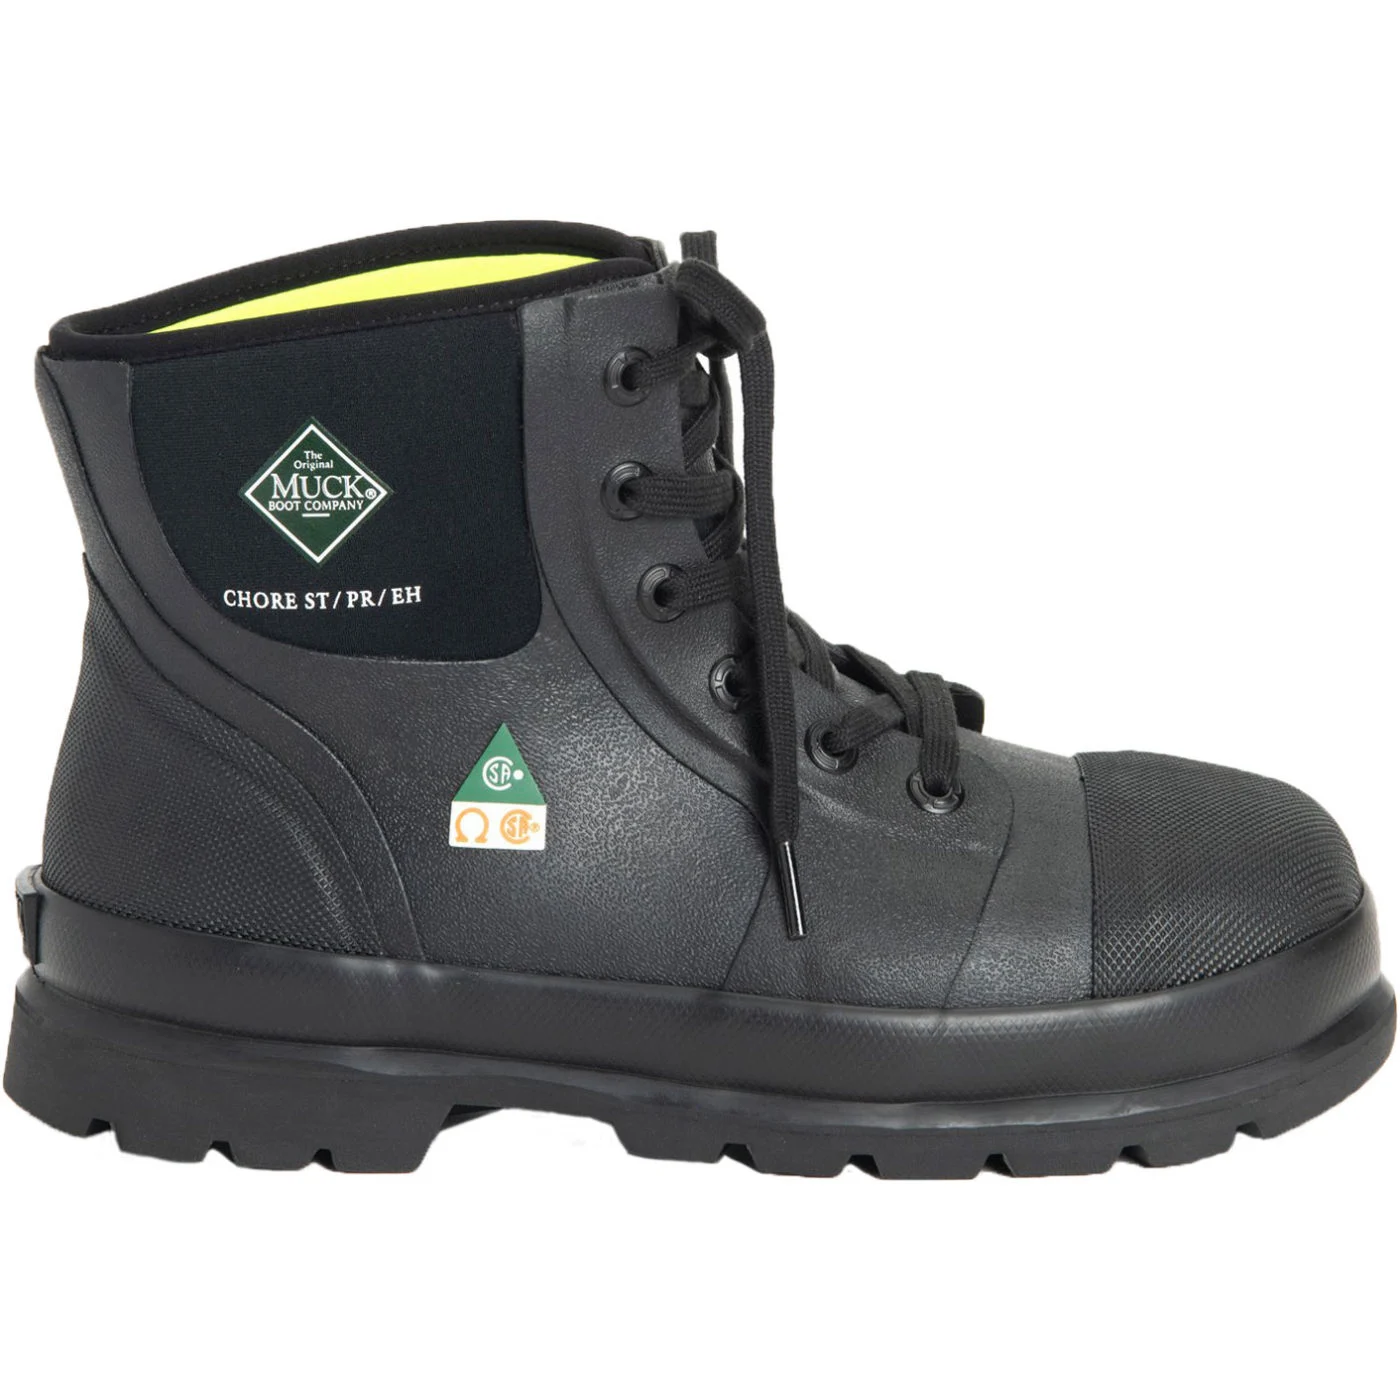 Muck Men's Chore Classic 6 Inch CSA Steel Toe Boots from GME Supply